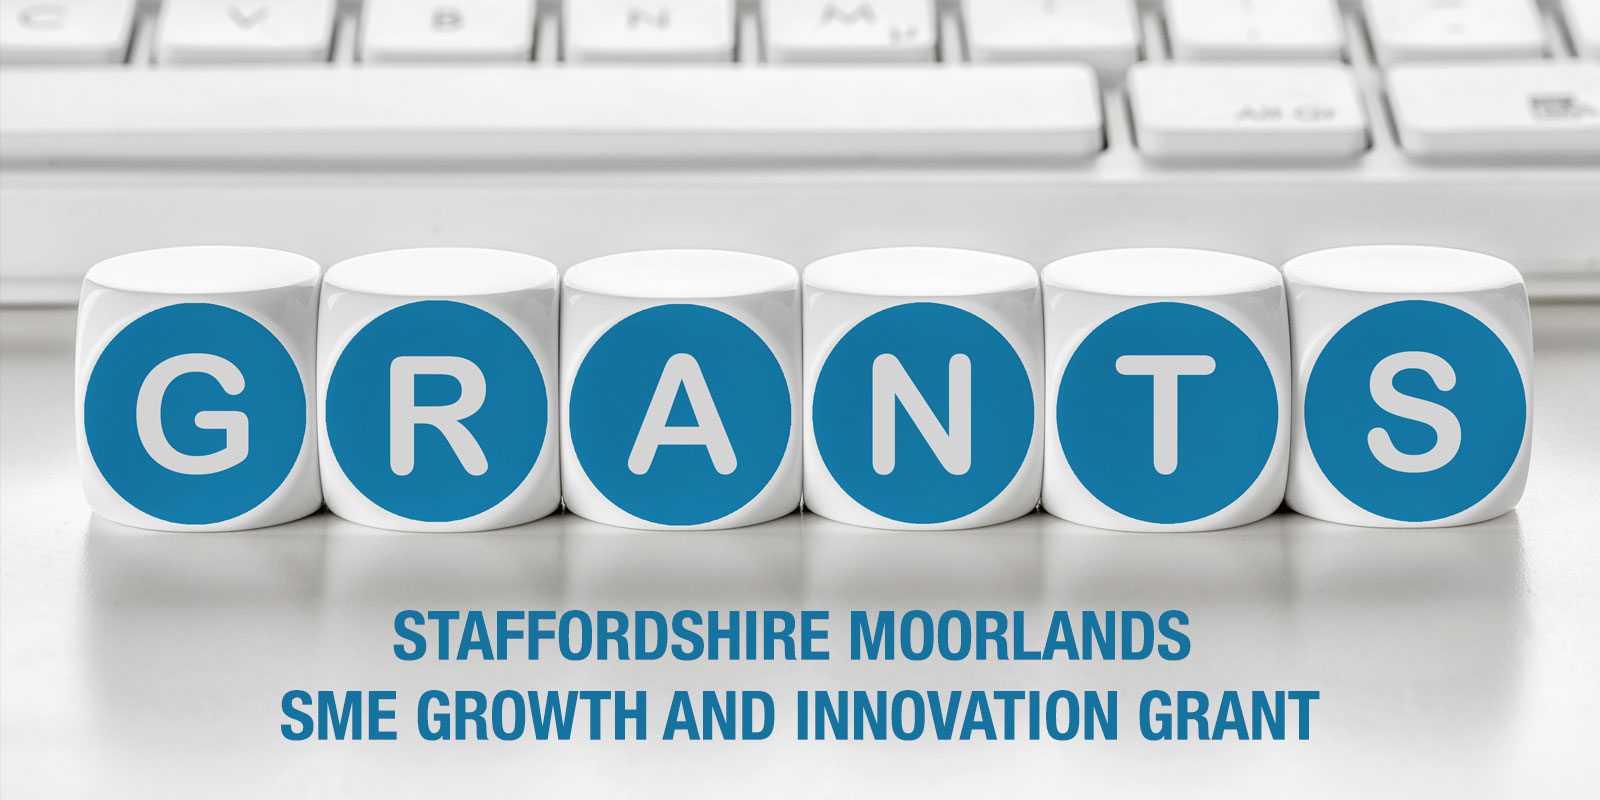 Staffordshire Moorlands SME Growth and Innovation Grant